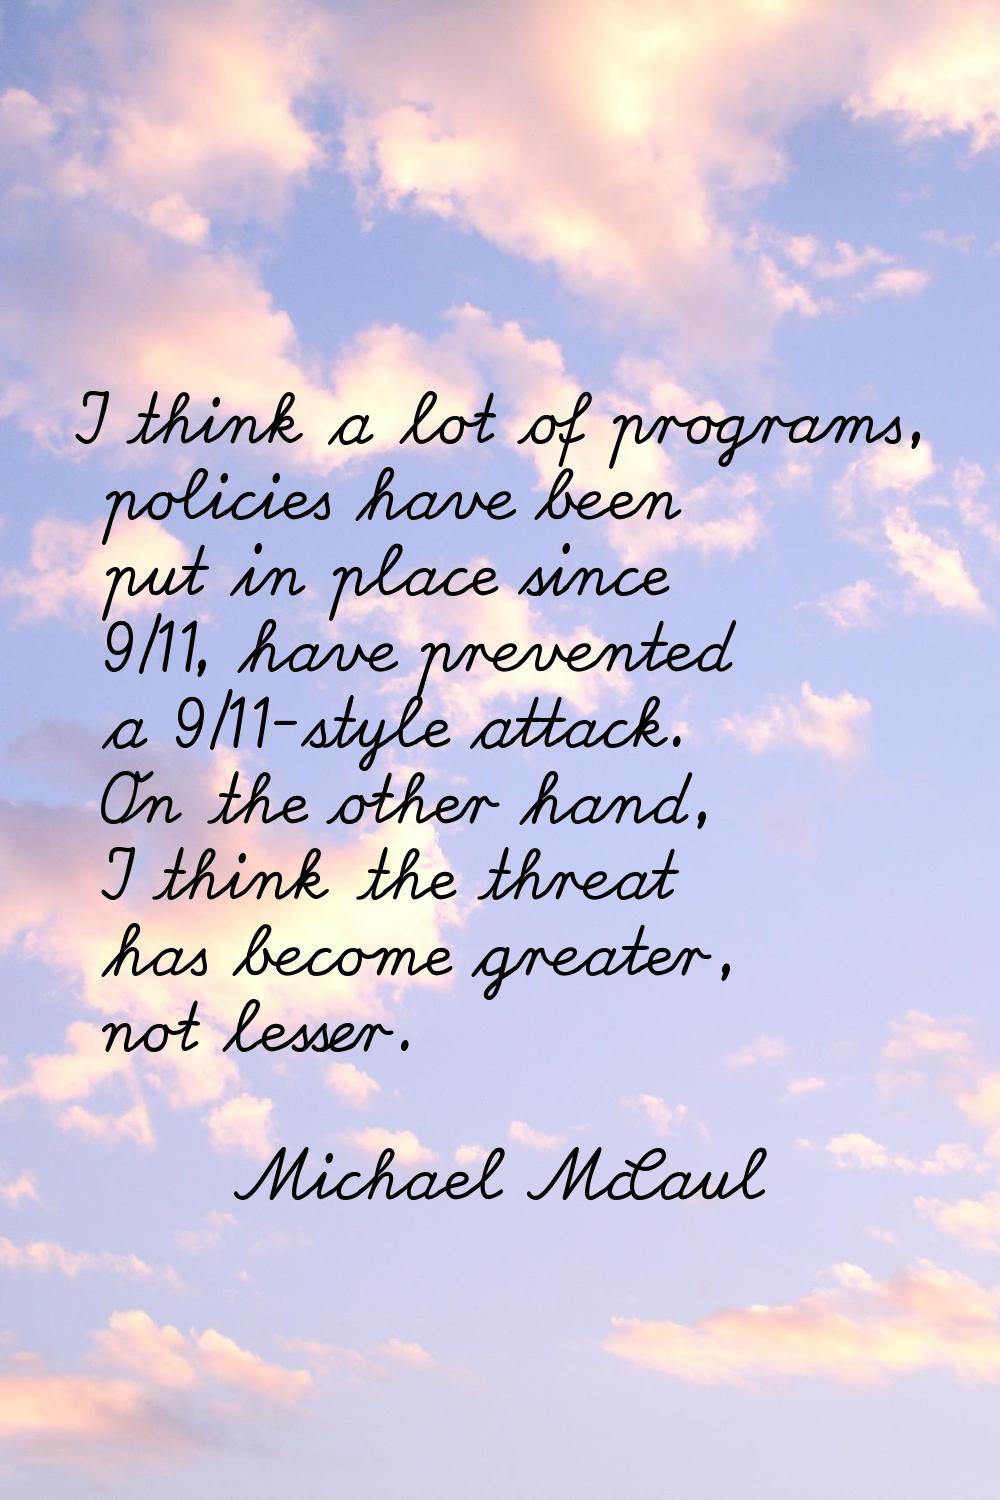 I think a lot of programs, policies have been put in place since 9/11, have prevented a 9/11-style 